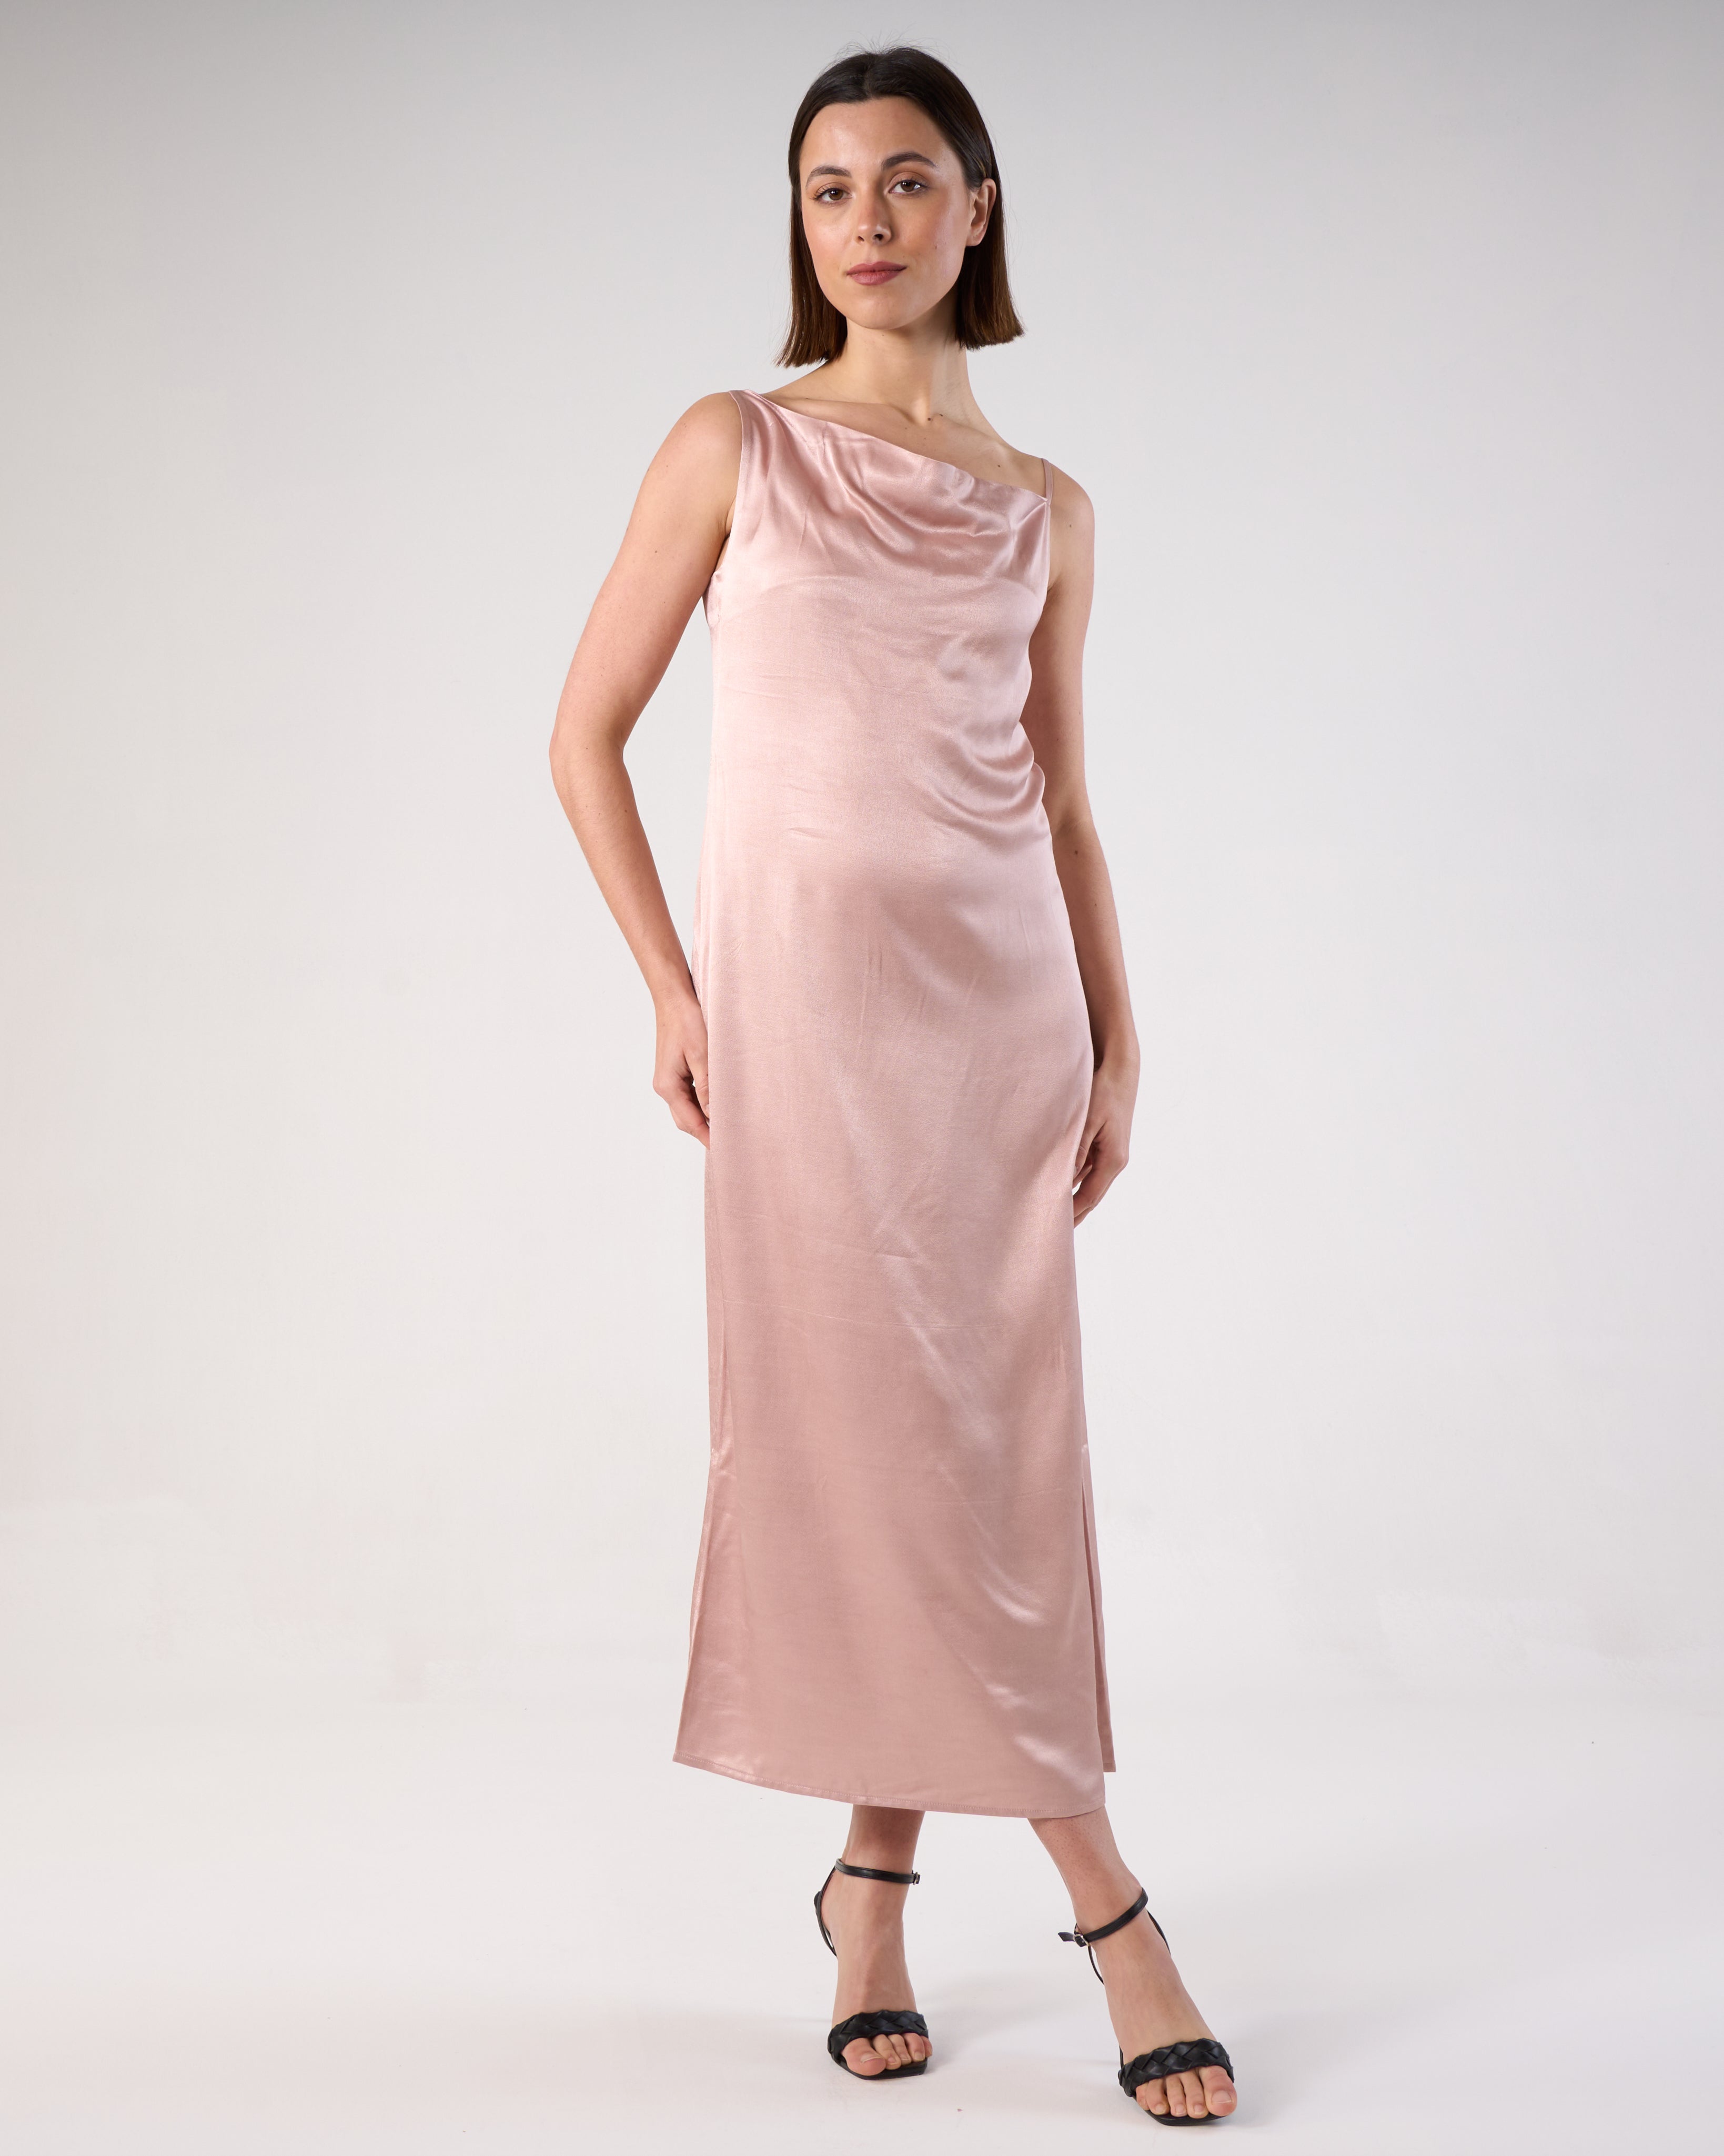 Elvira Silk Dress Embrace Open, Sophisticated Semi-Fitted Style with Bias Cut